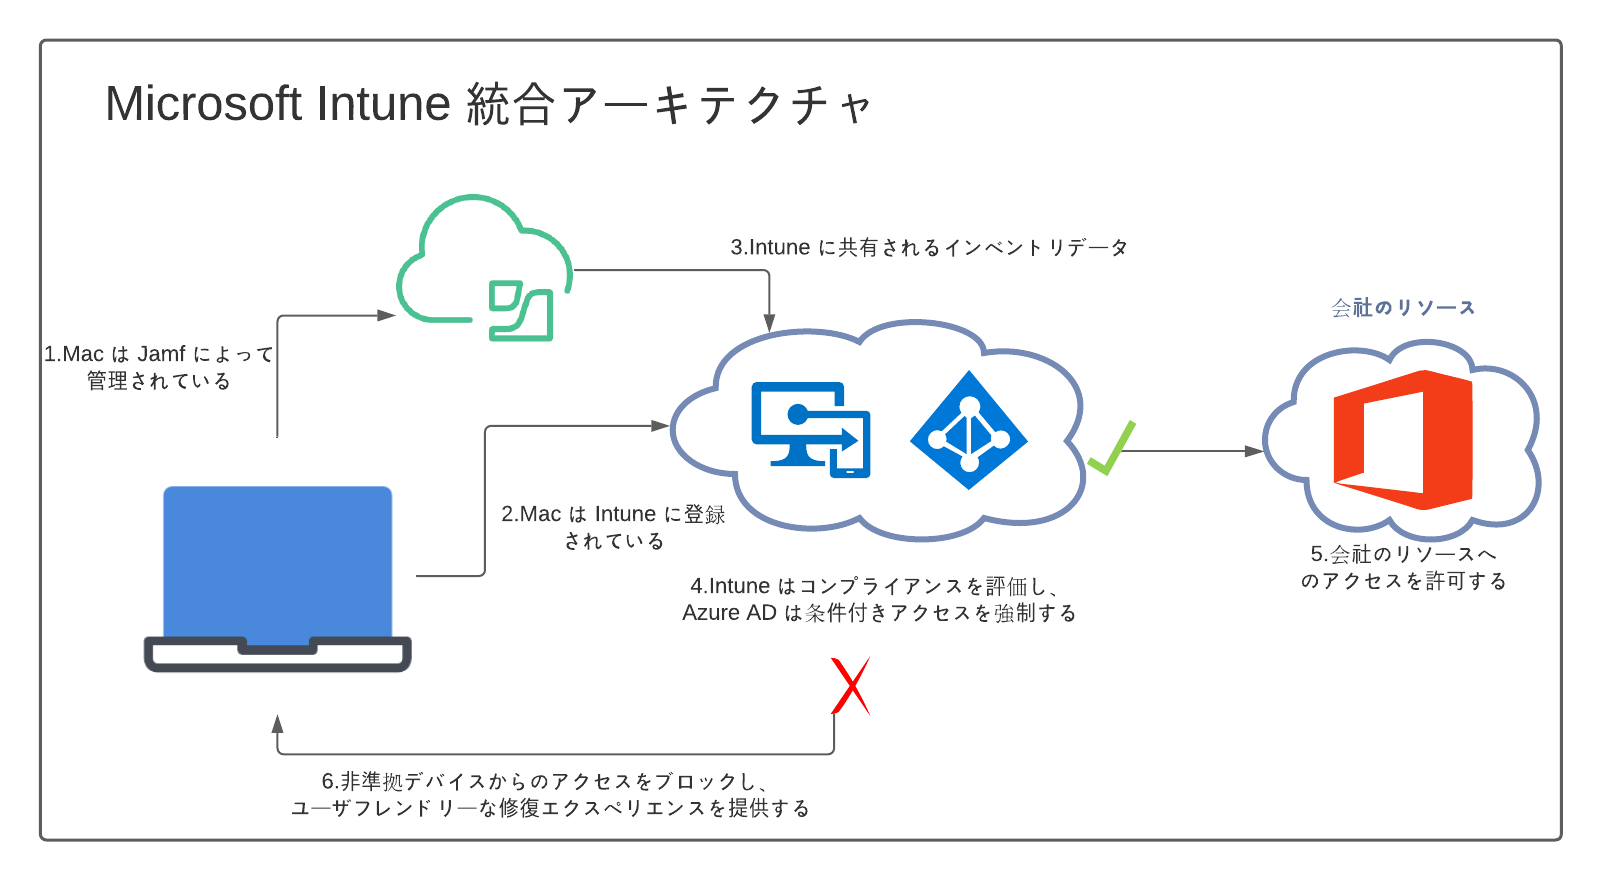 images/download/attachments/85400259/JA_Microsoft_Intune_Integration_Architecture.png